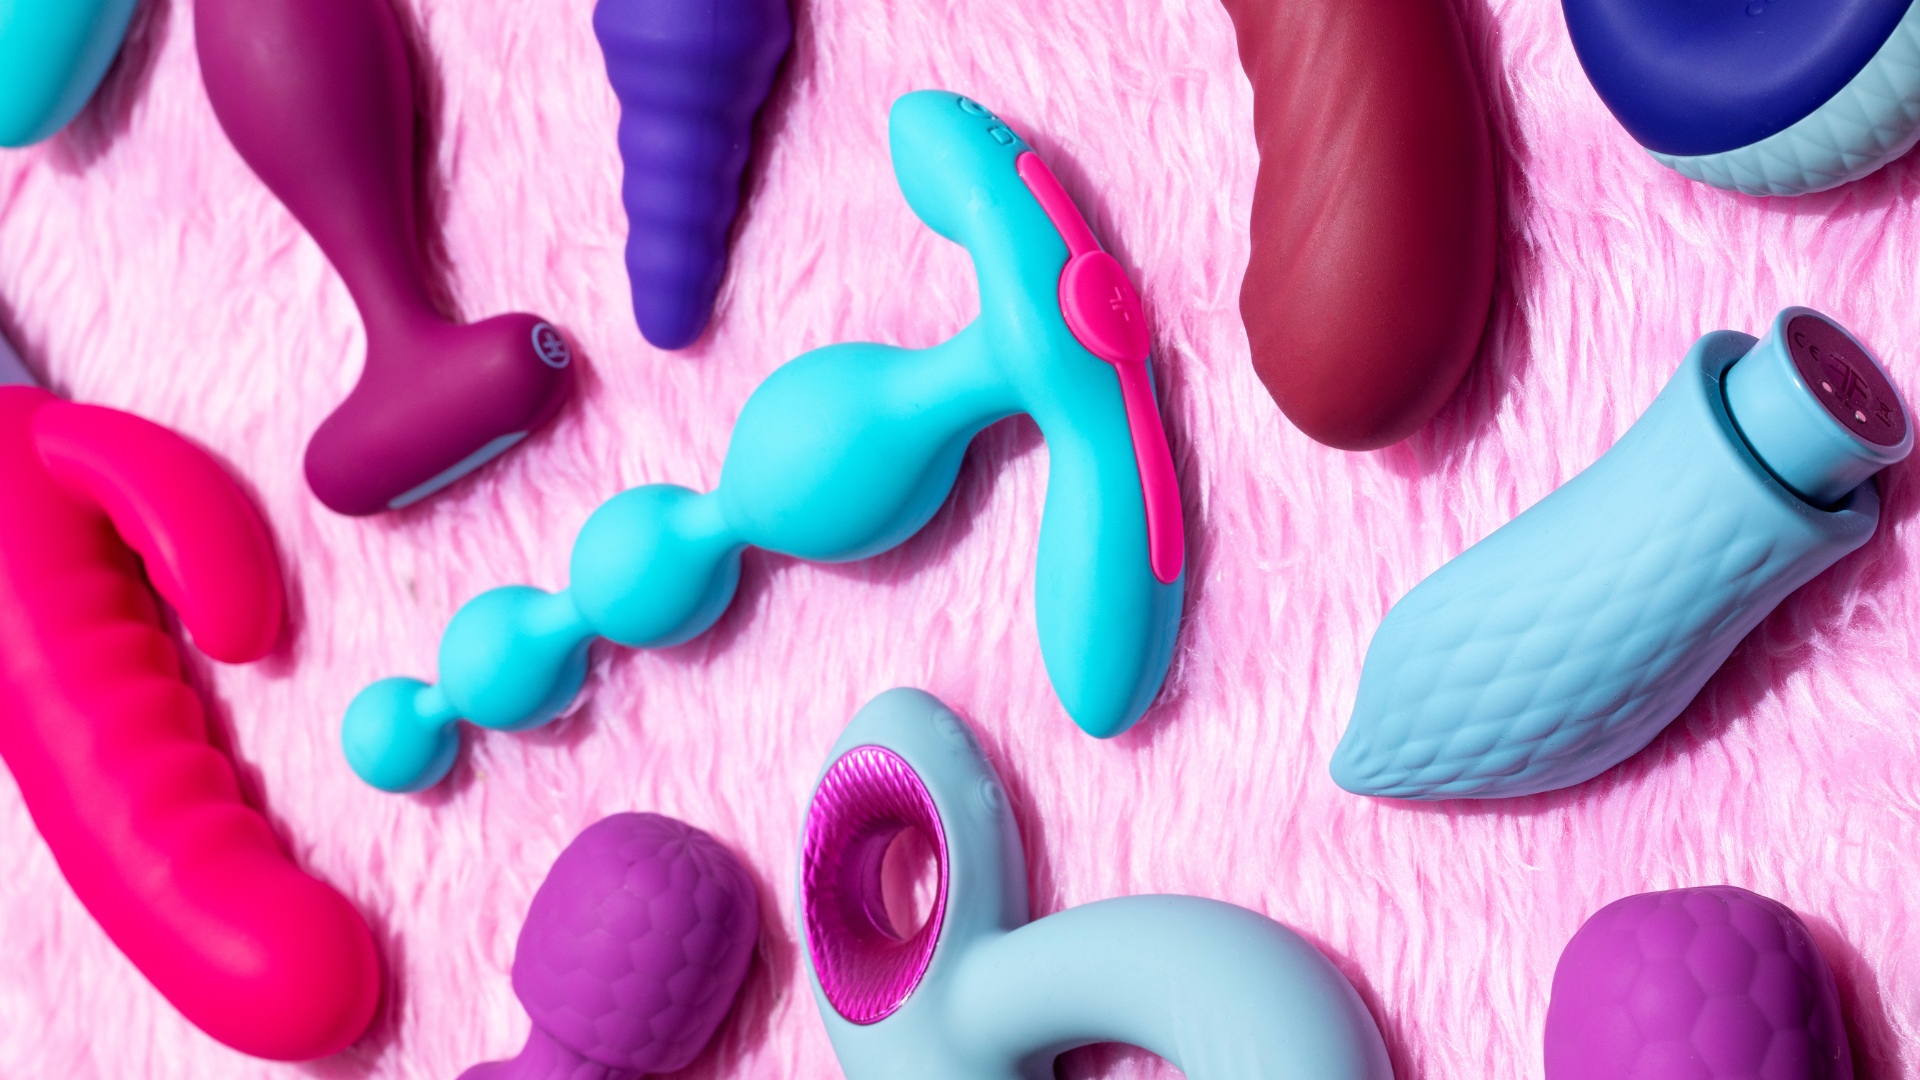 Femme funn sex toys against a pink background